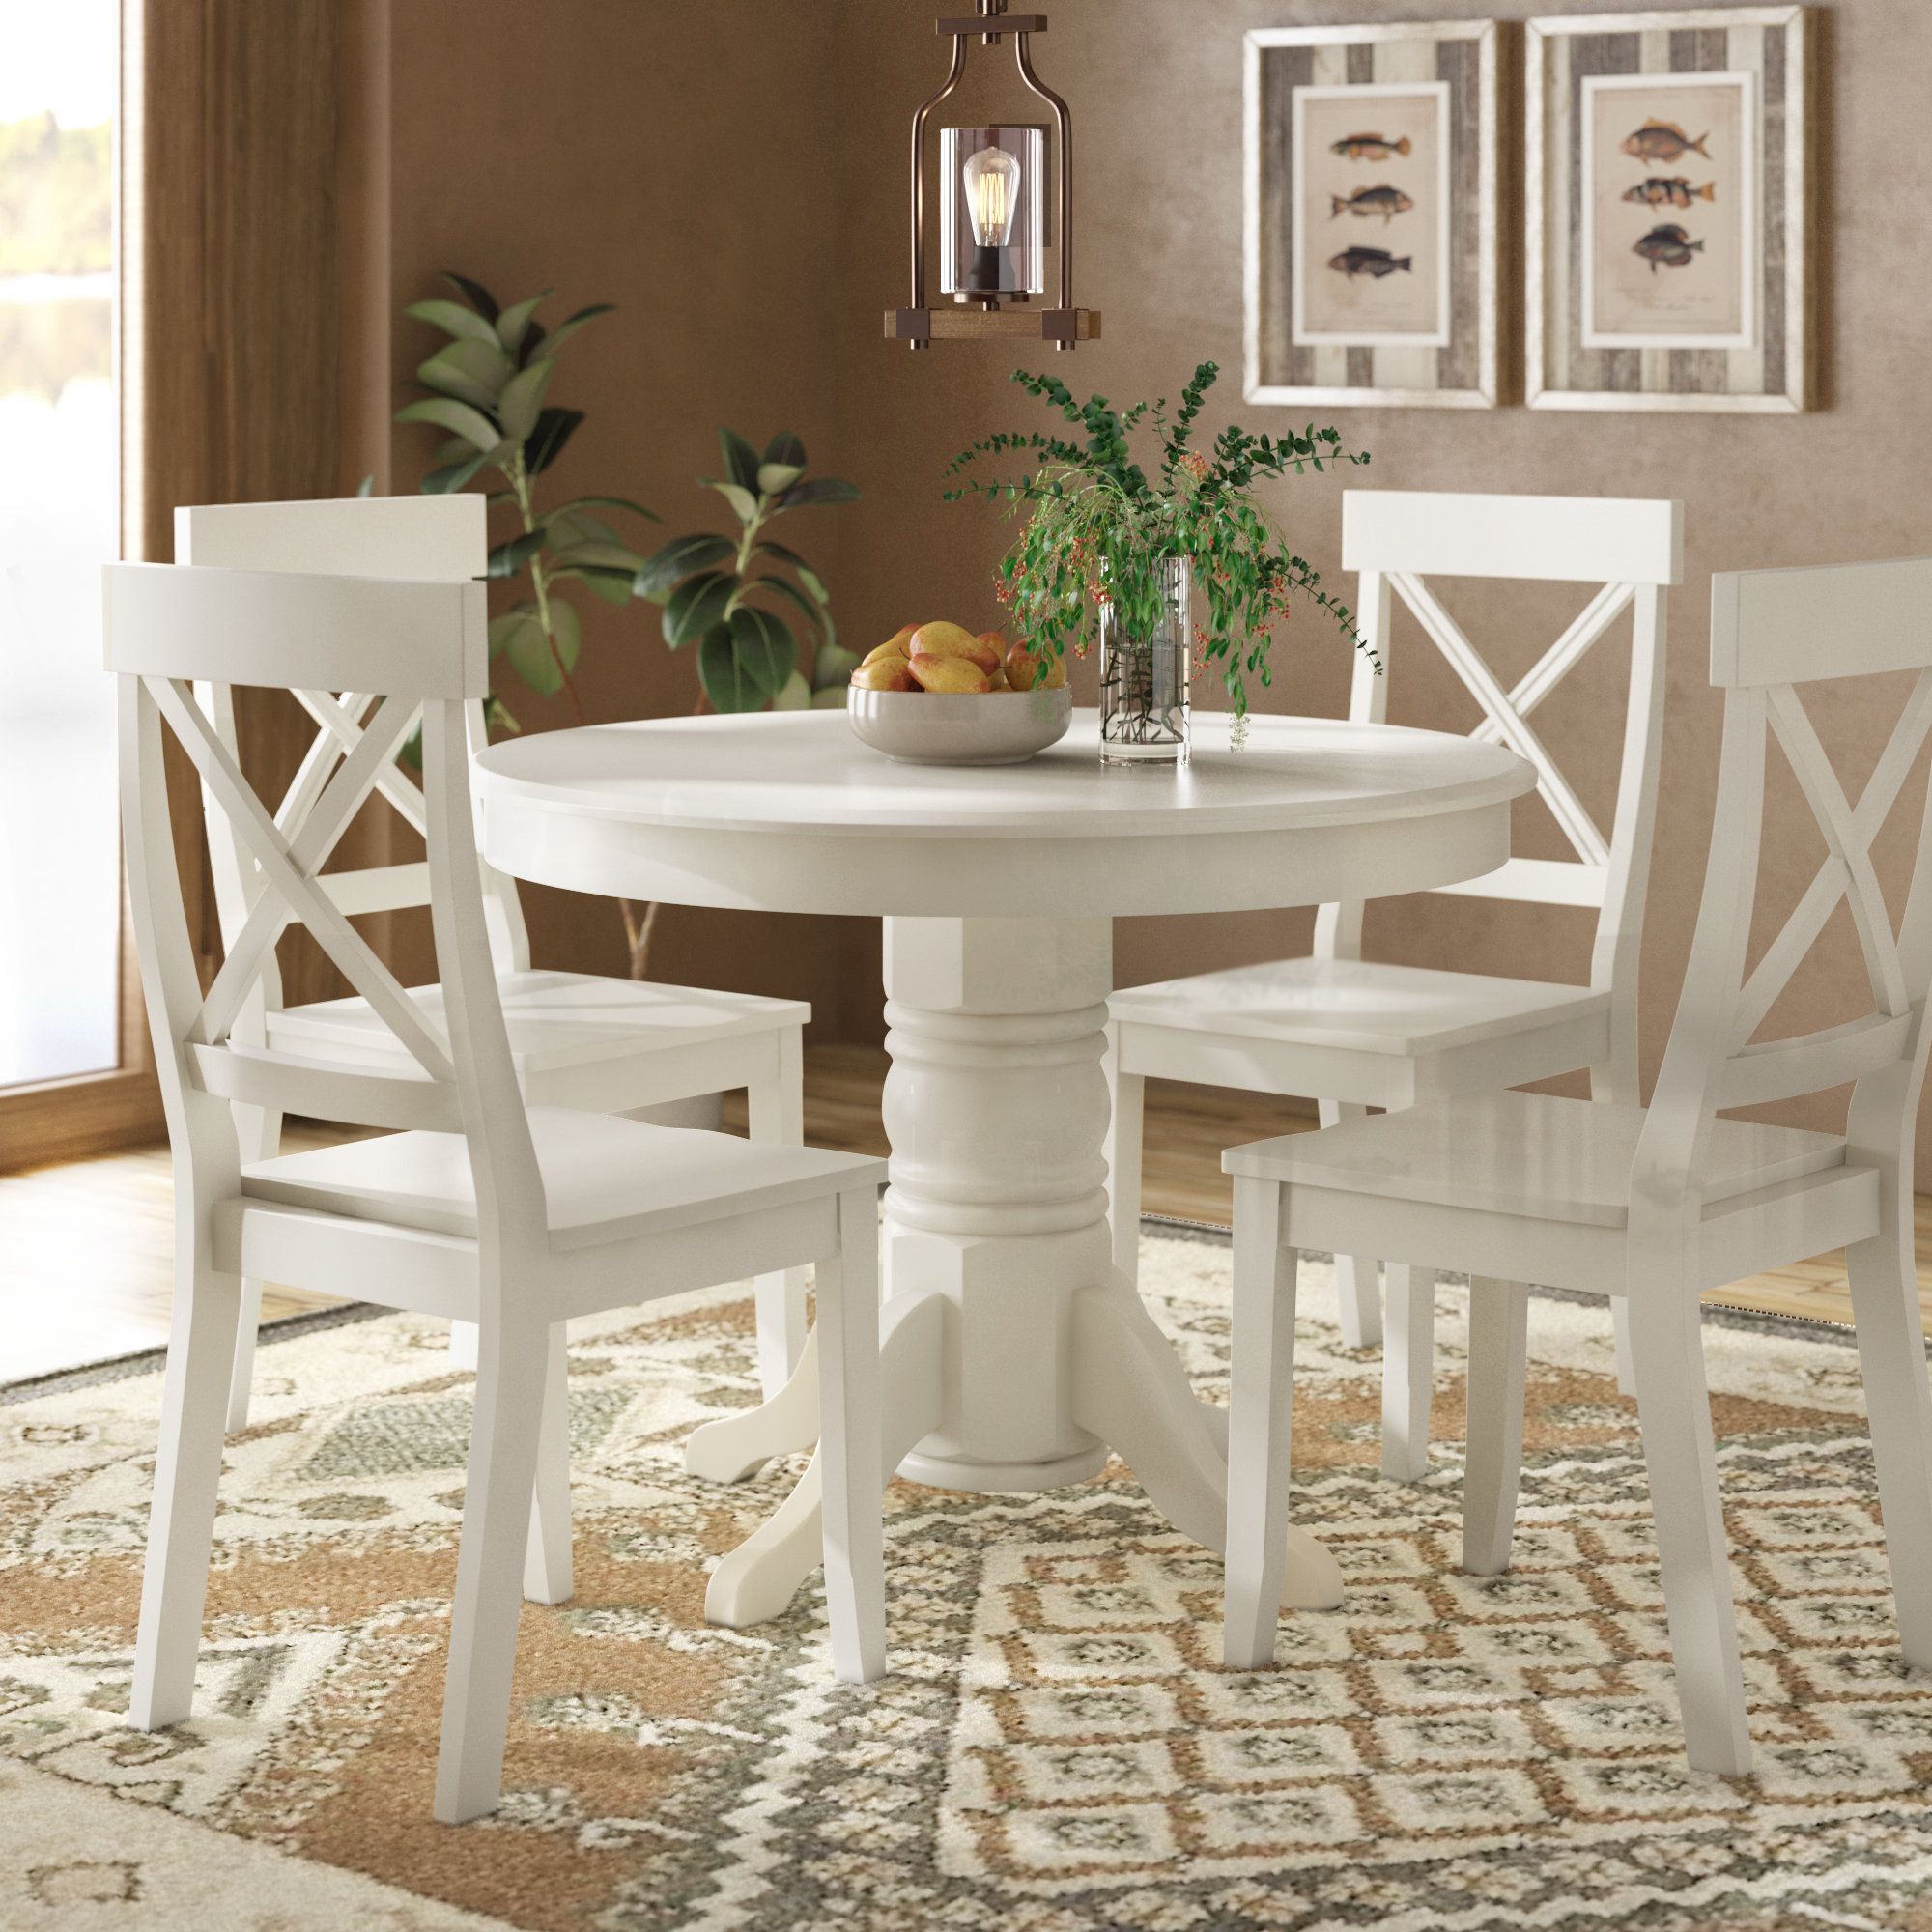 Favorite August Grove Standridge 5 Piece Dining Set & Reviews (View 13 of 20)